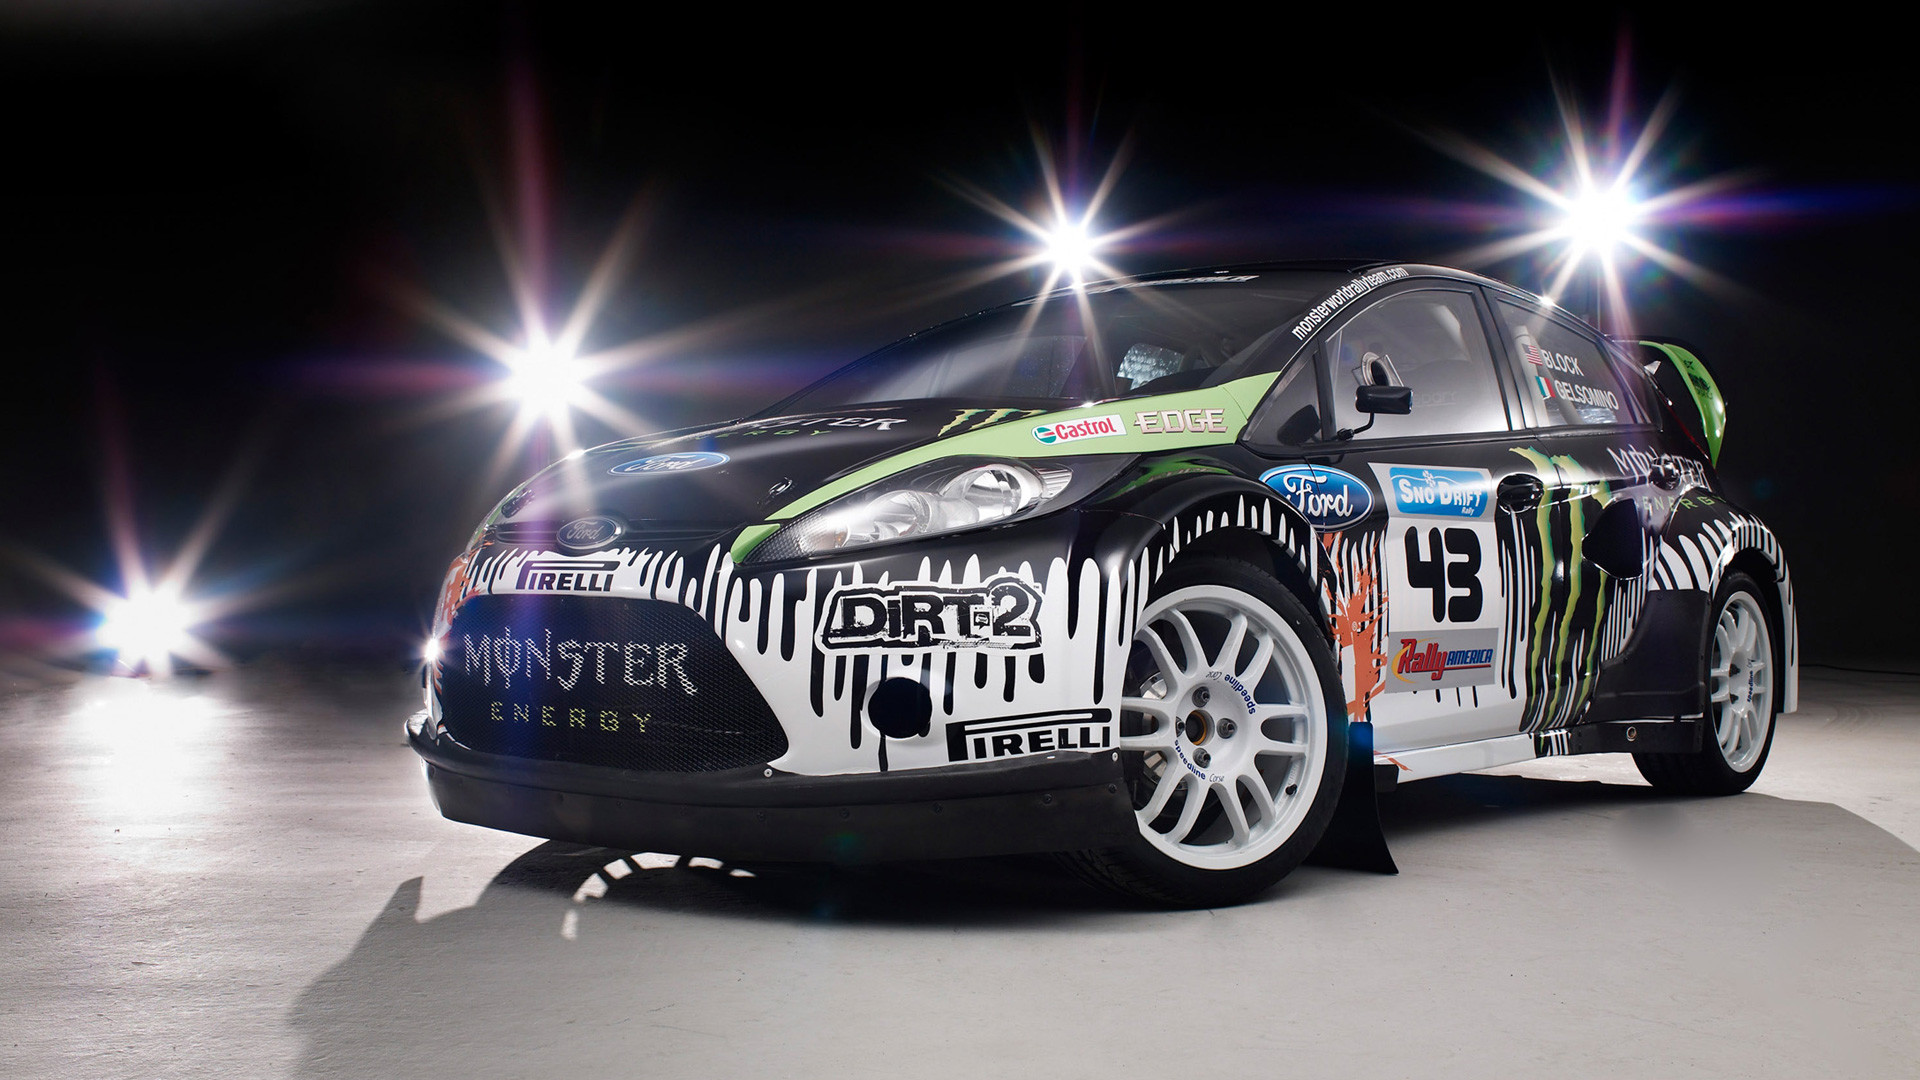 1920x1080 Ken Block's Monster Ford Fiesta Picture from our gallery, which contains 5  high resolution images of the model.